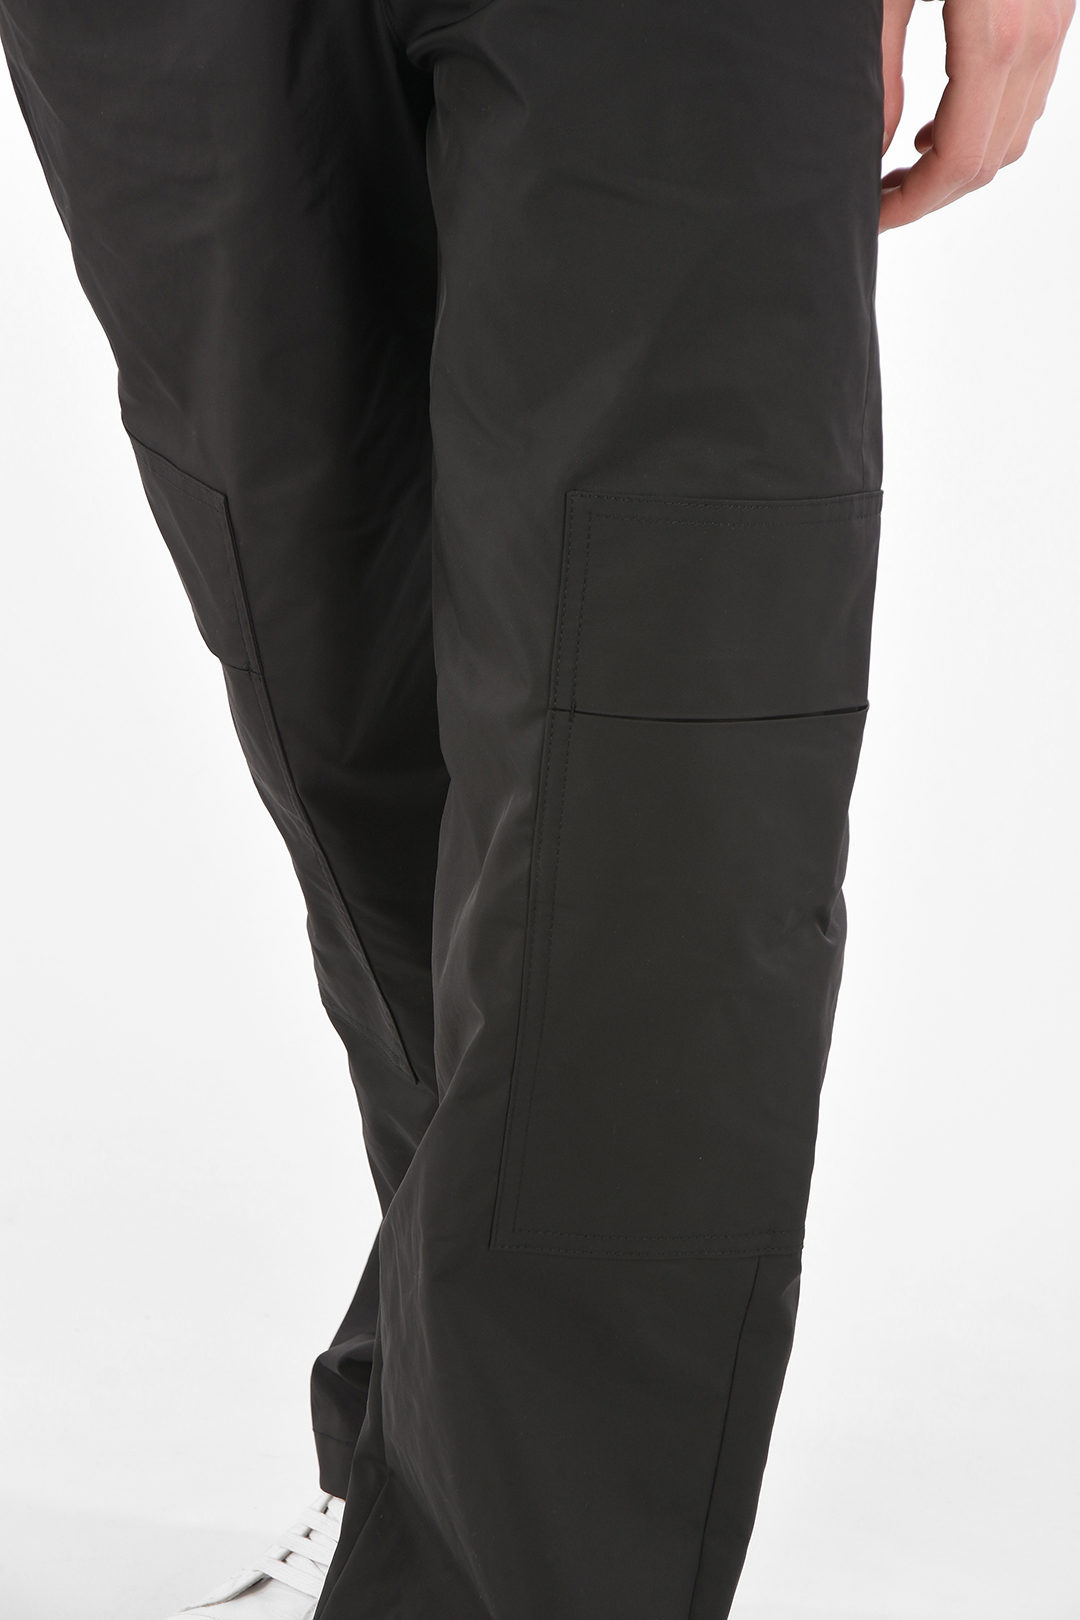 Valentino Nylon Cargo Pants with Belt Loops men - Glamood Outlet